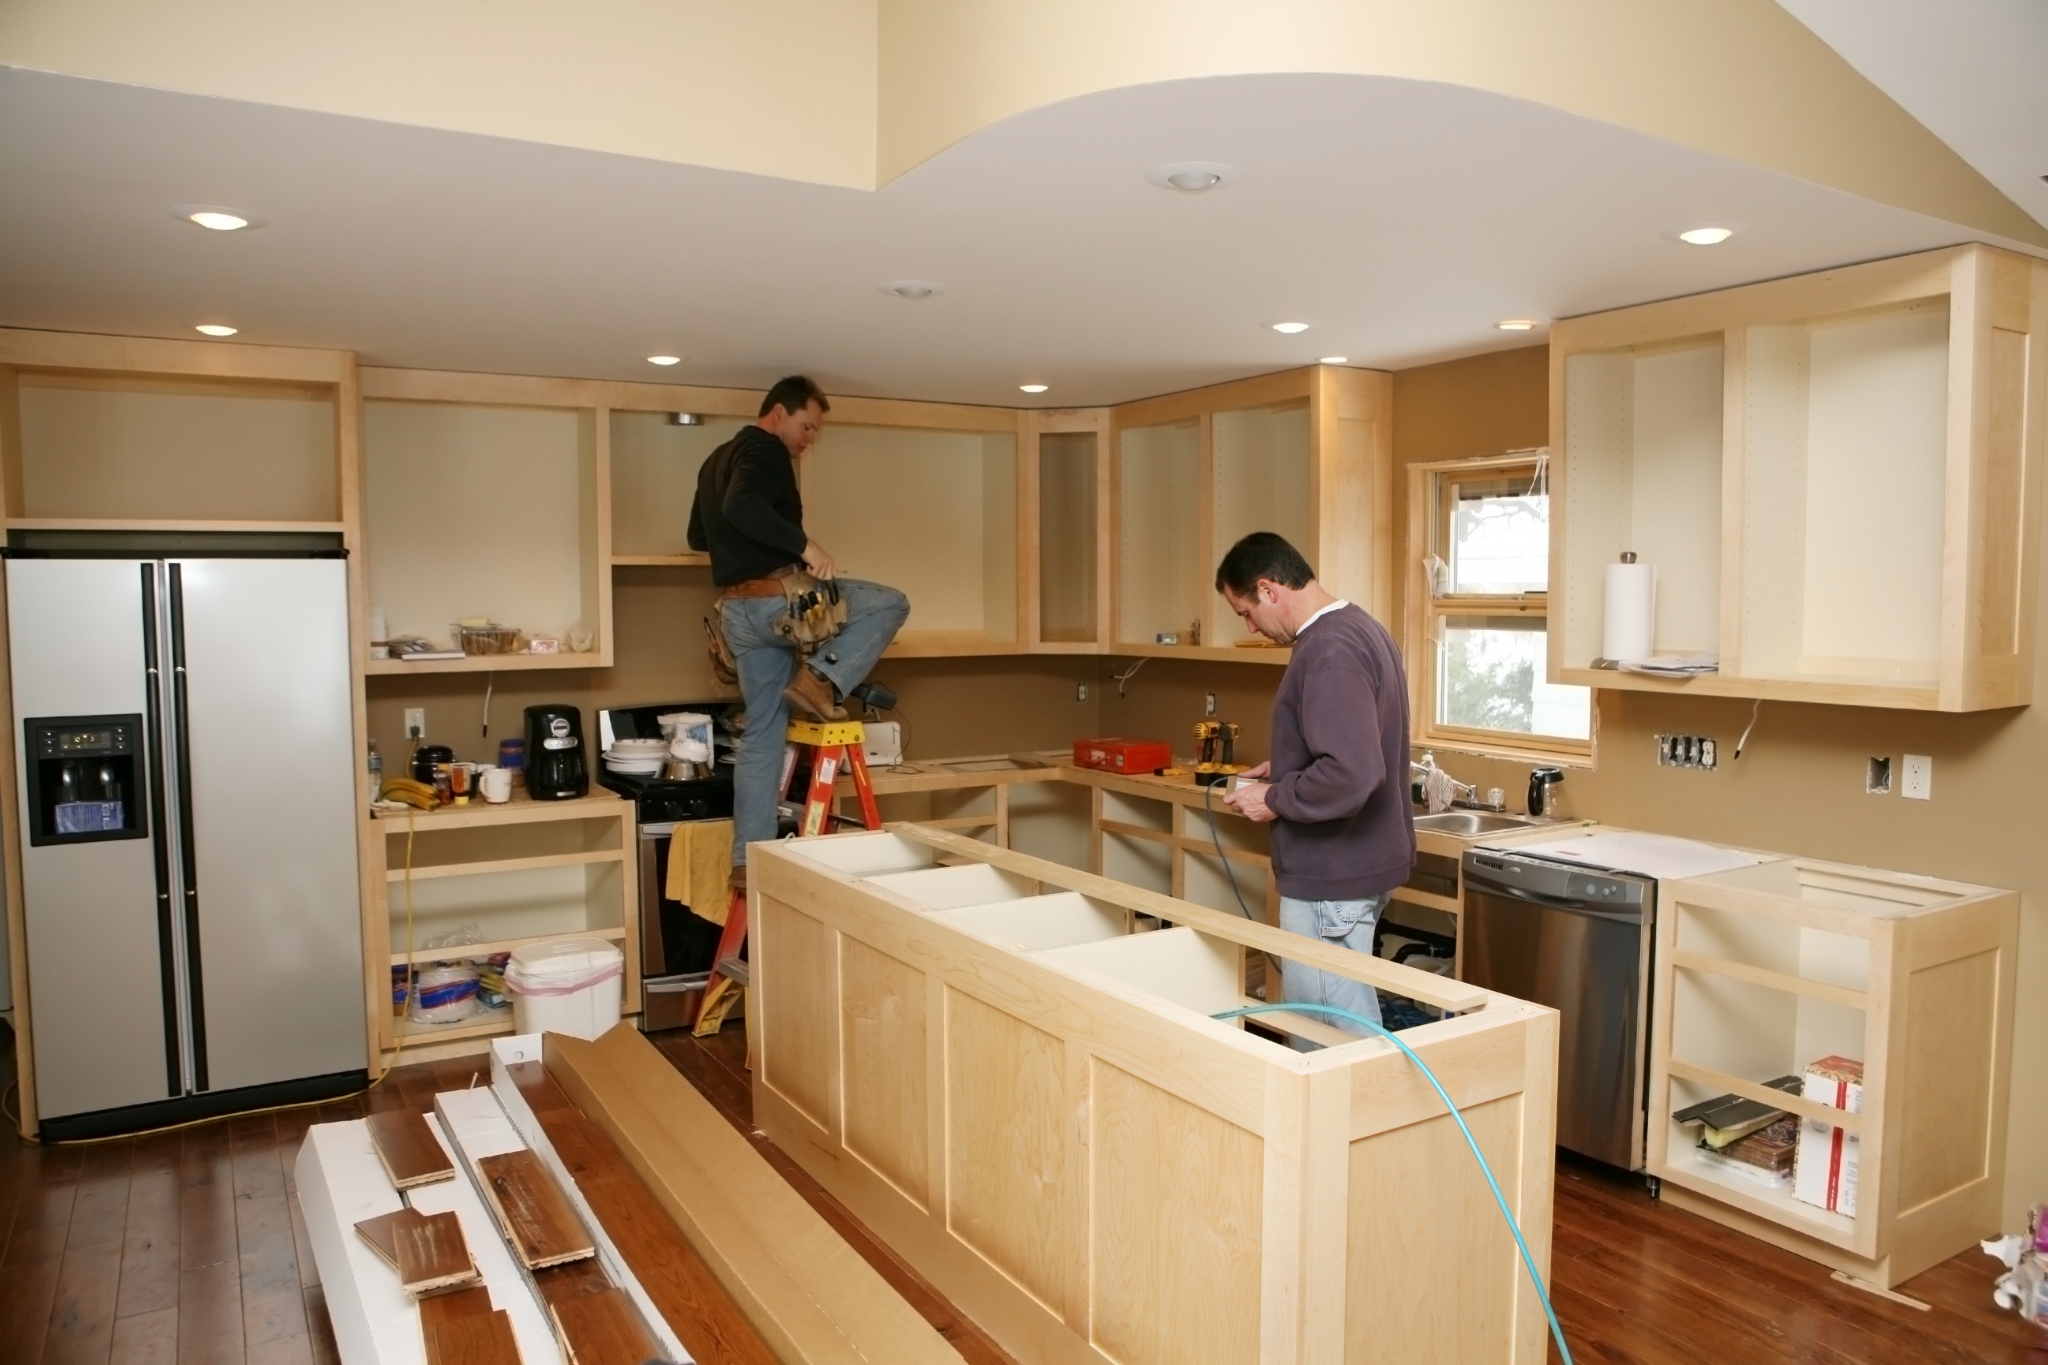 70 - 80 % of your Kitchen is Cabinets. They're the first thing people will notice when they enter the room, and they can make or break your kitchen's functionality.